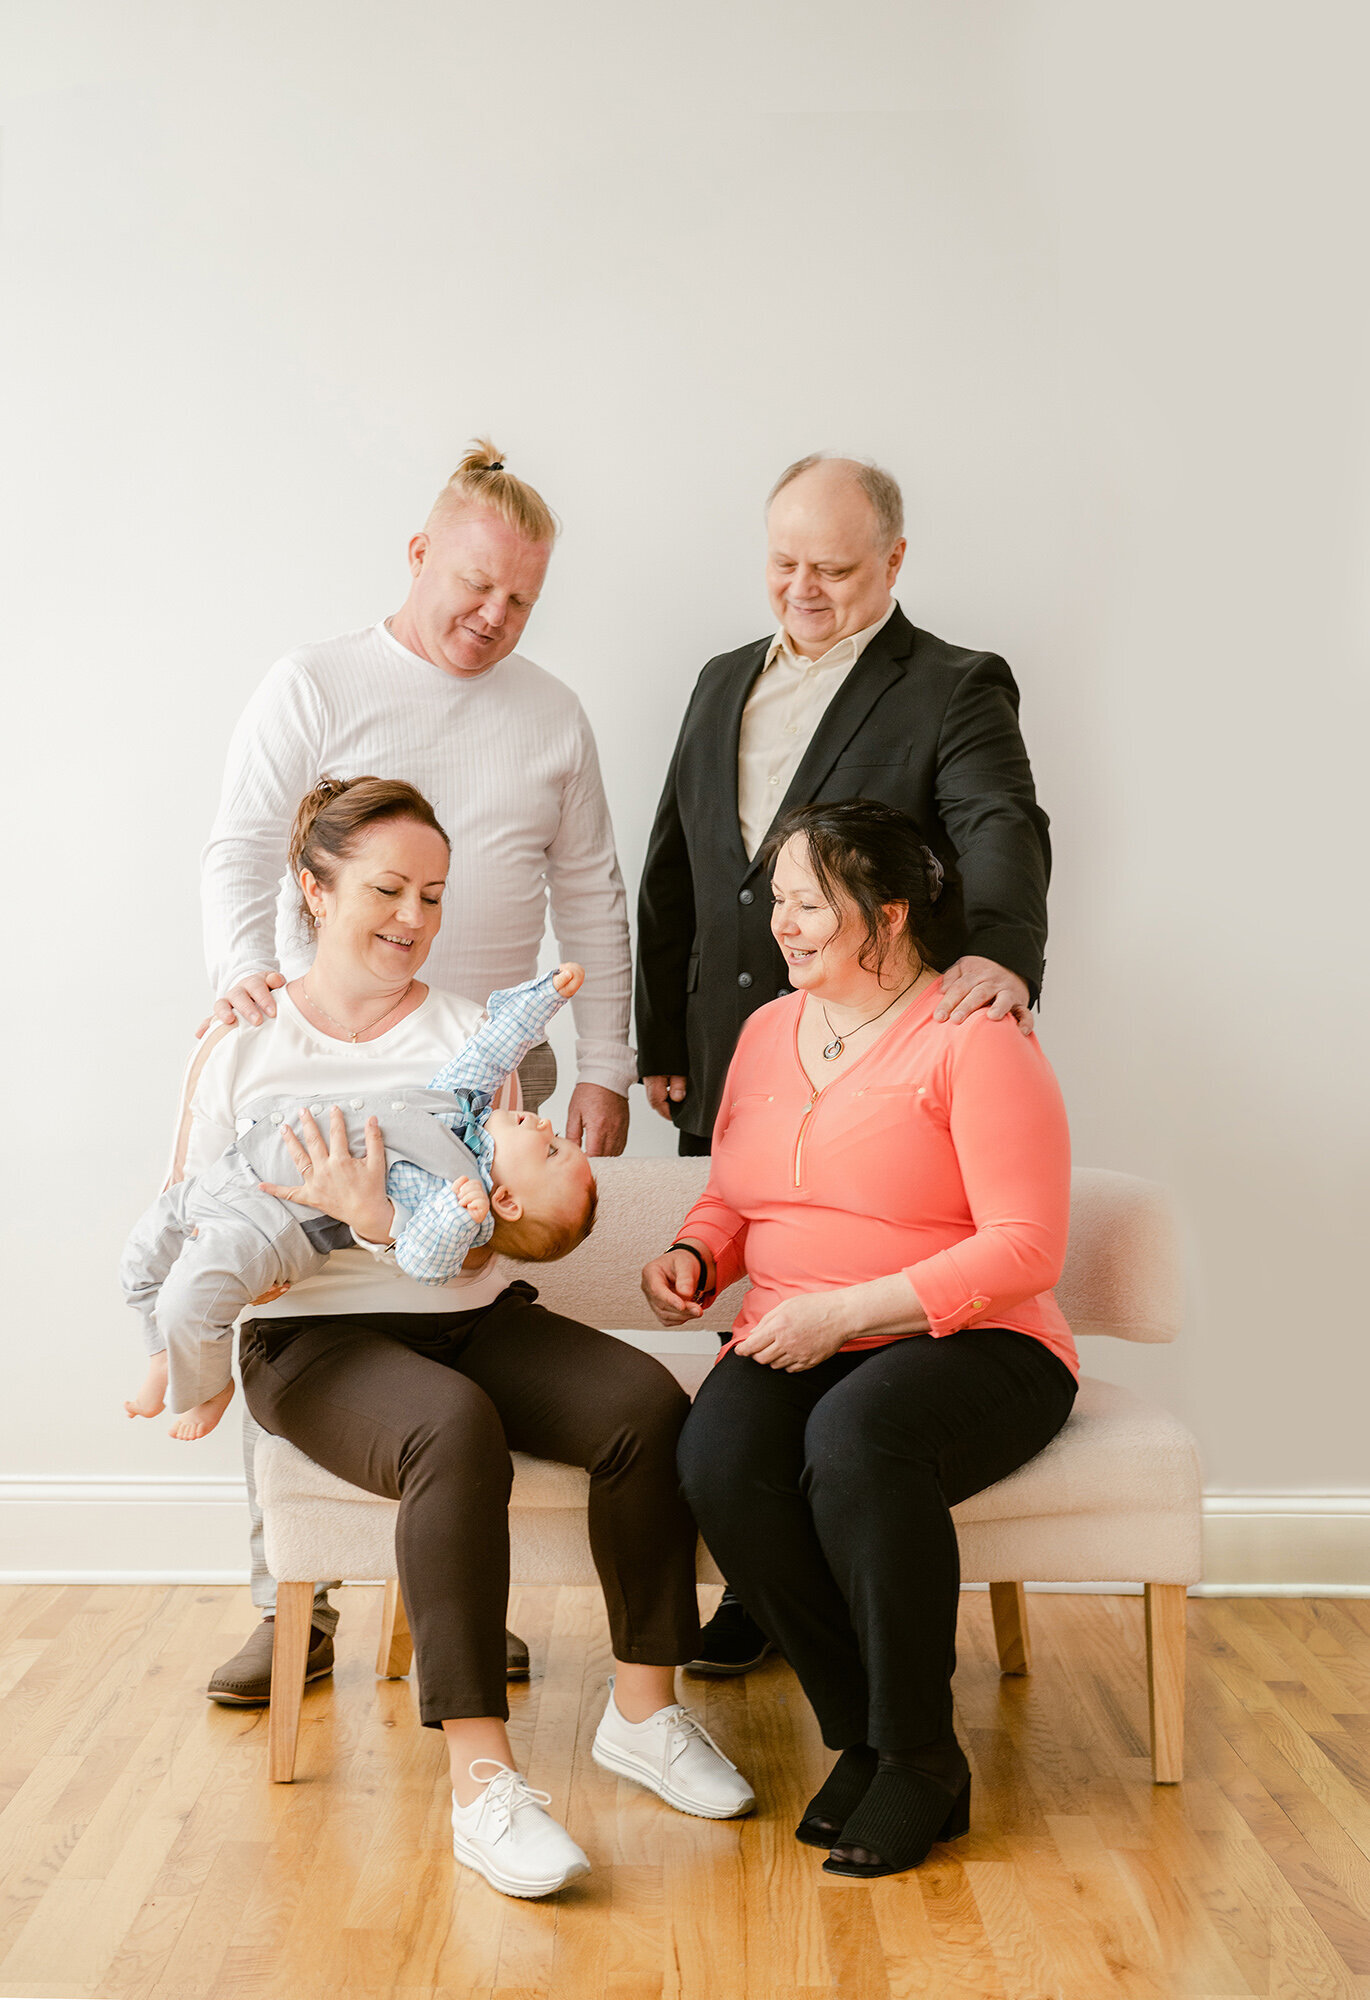 Both sets of grandparents playing with their one year old grandson during studio portraits